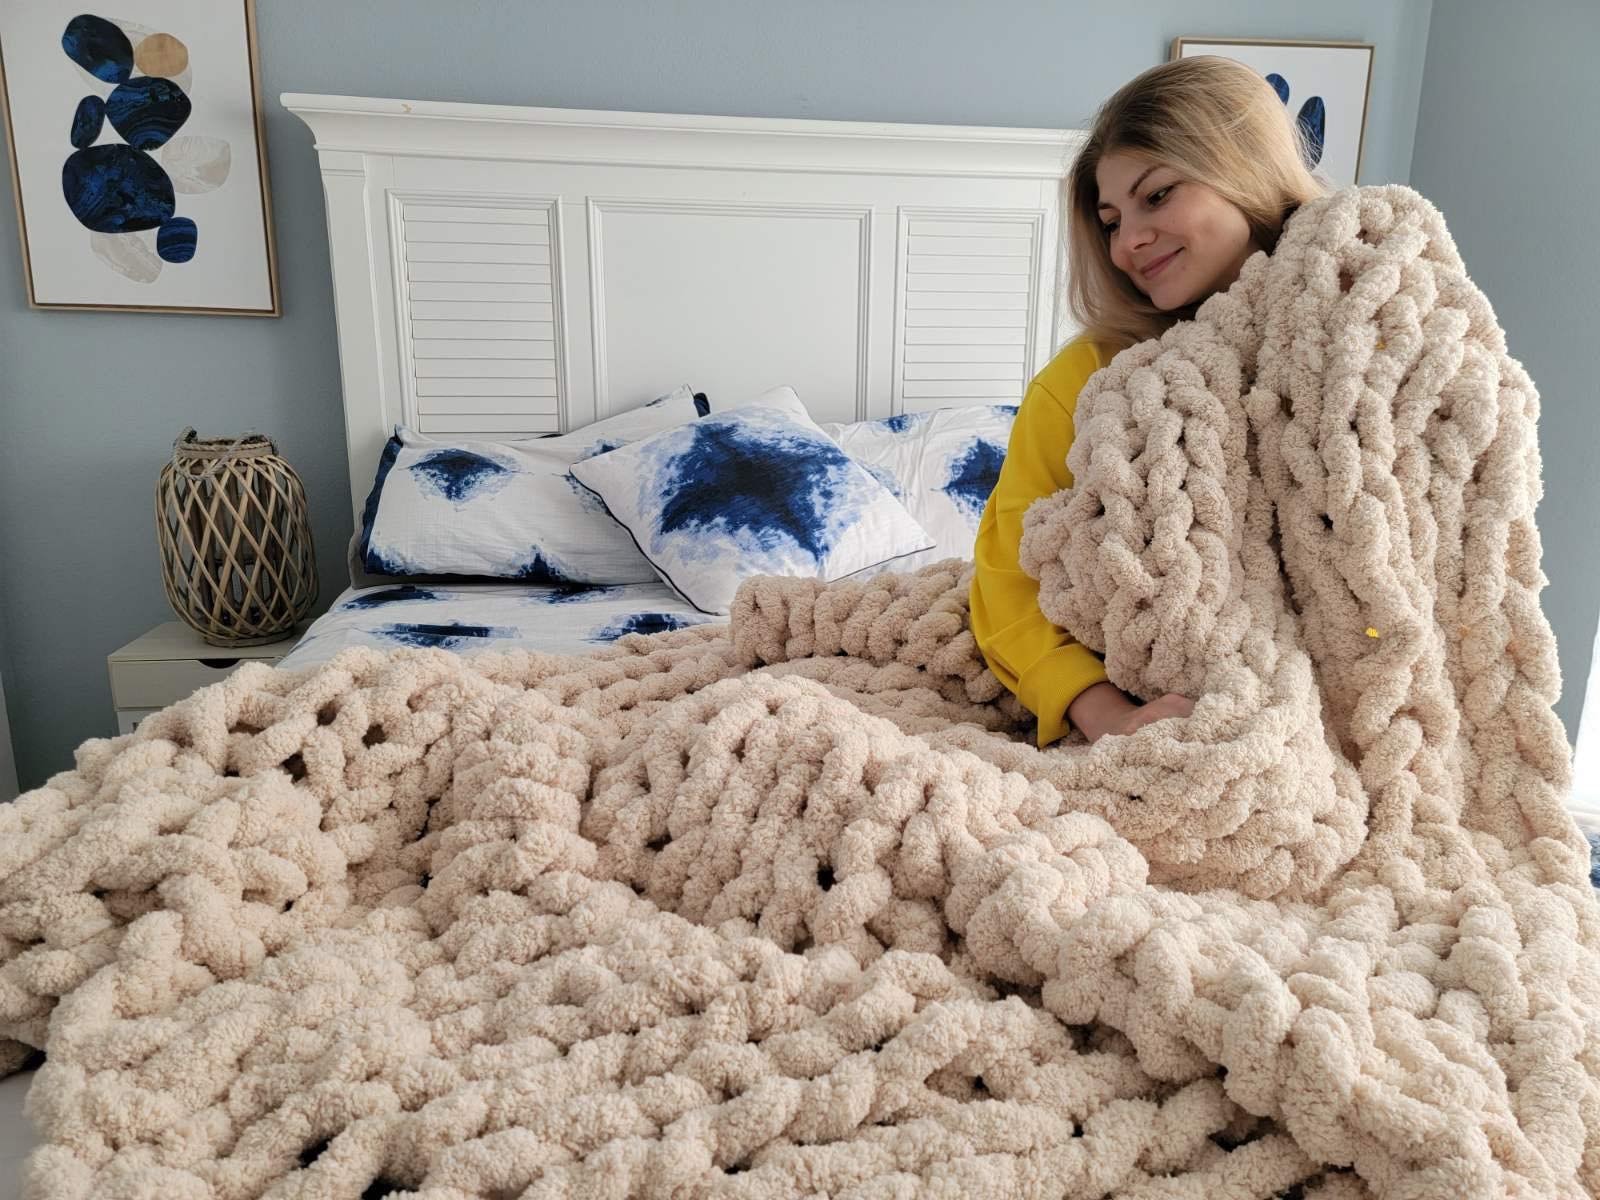 Same chunky blankets, different turorial style 🥰 #chunkyblanket #chun, Chunky Blanket Yarn